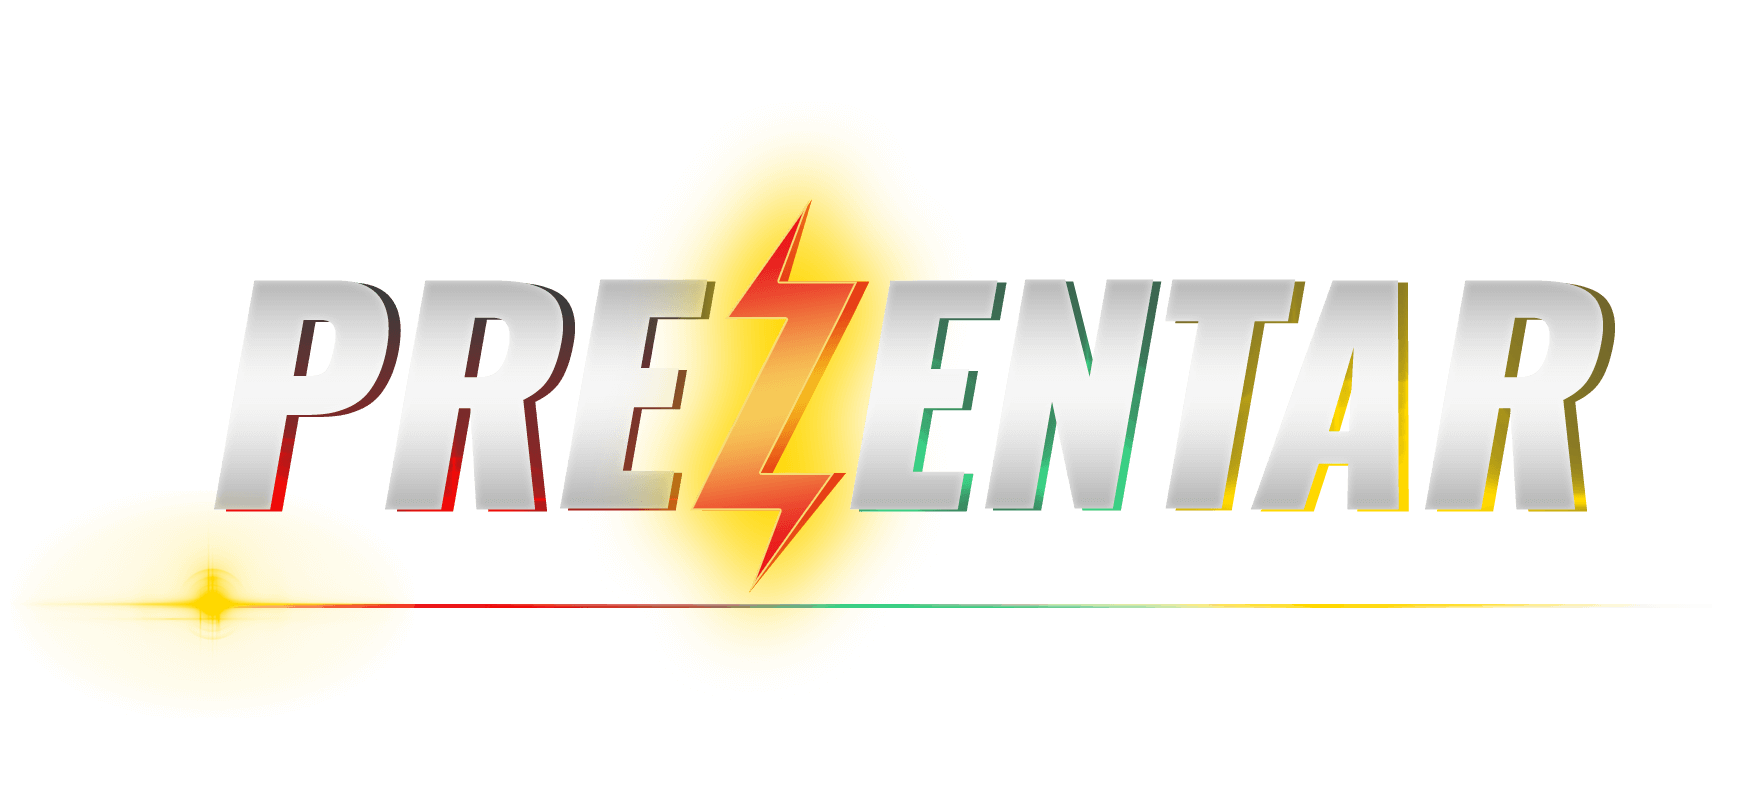 “Interested in Prezentar? Read BEFORE you buy!”